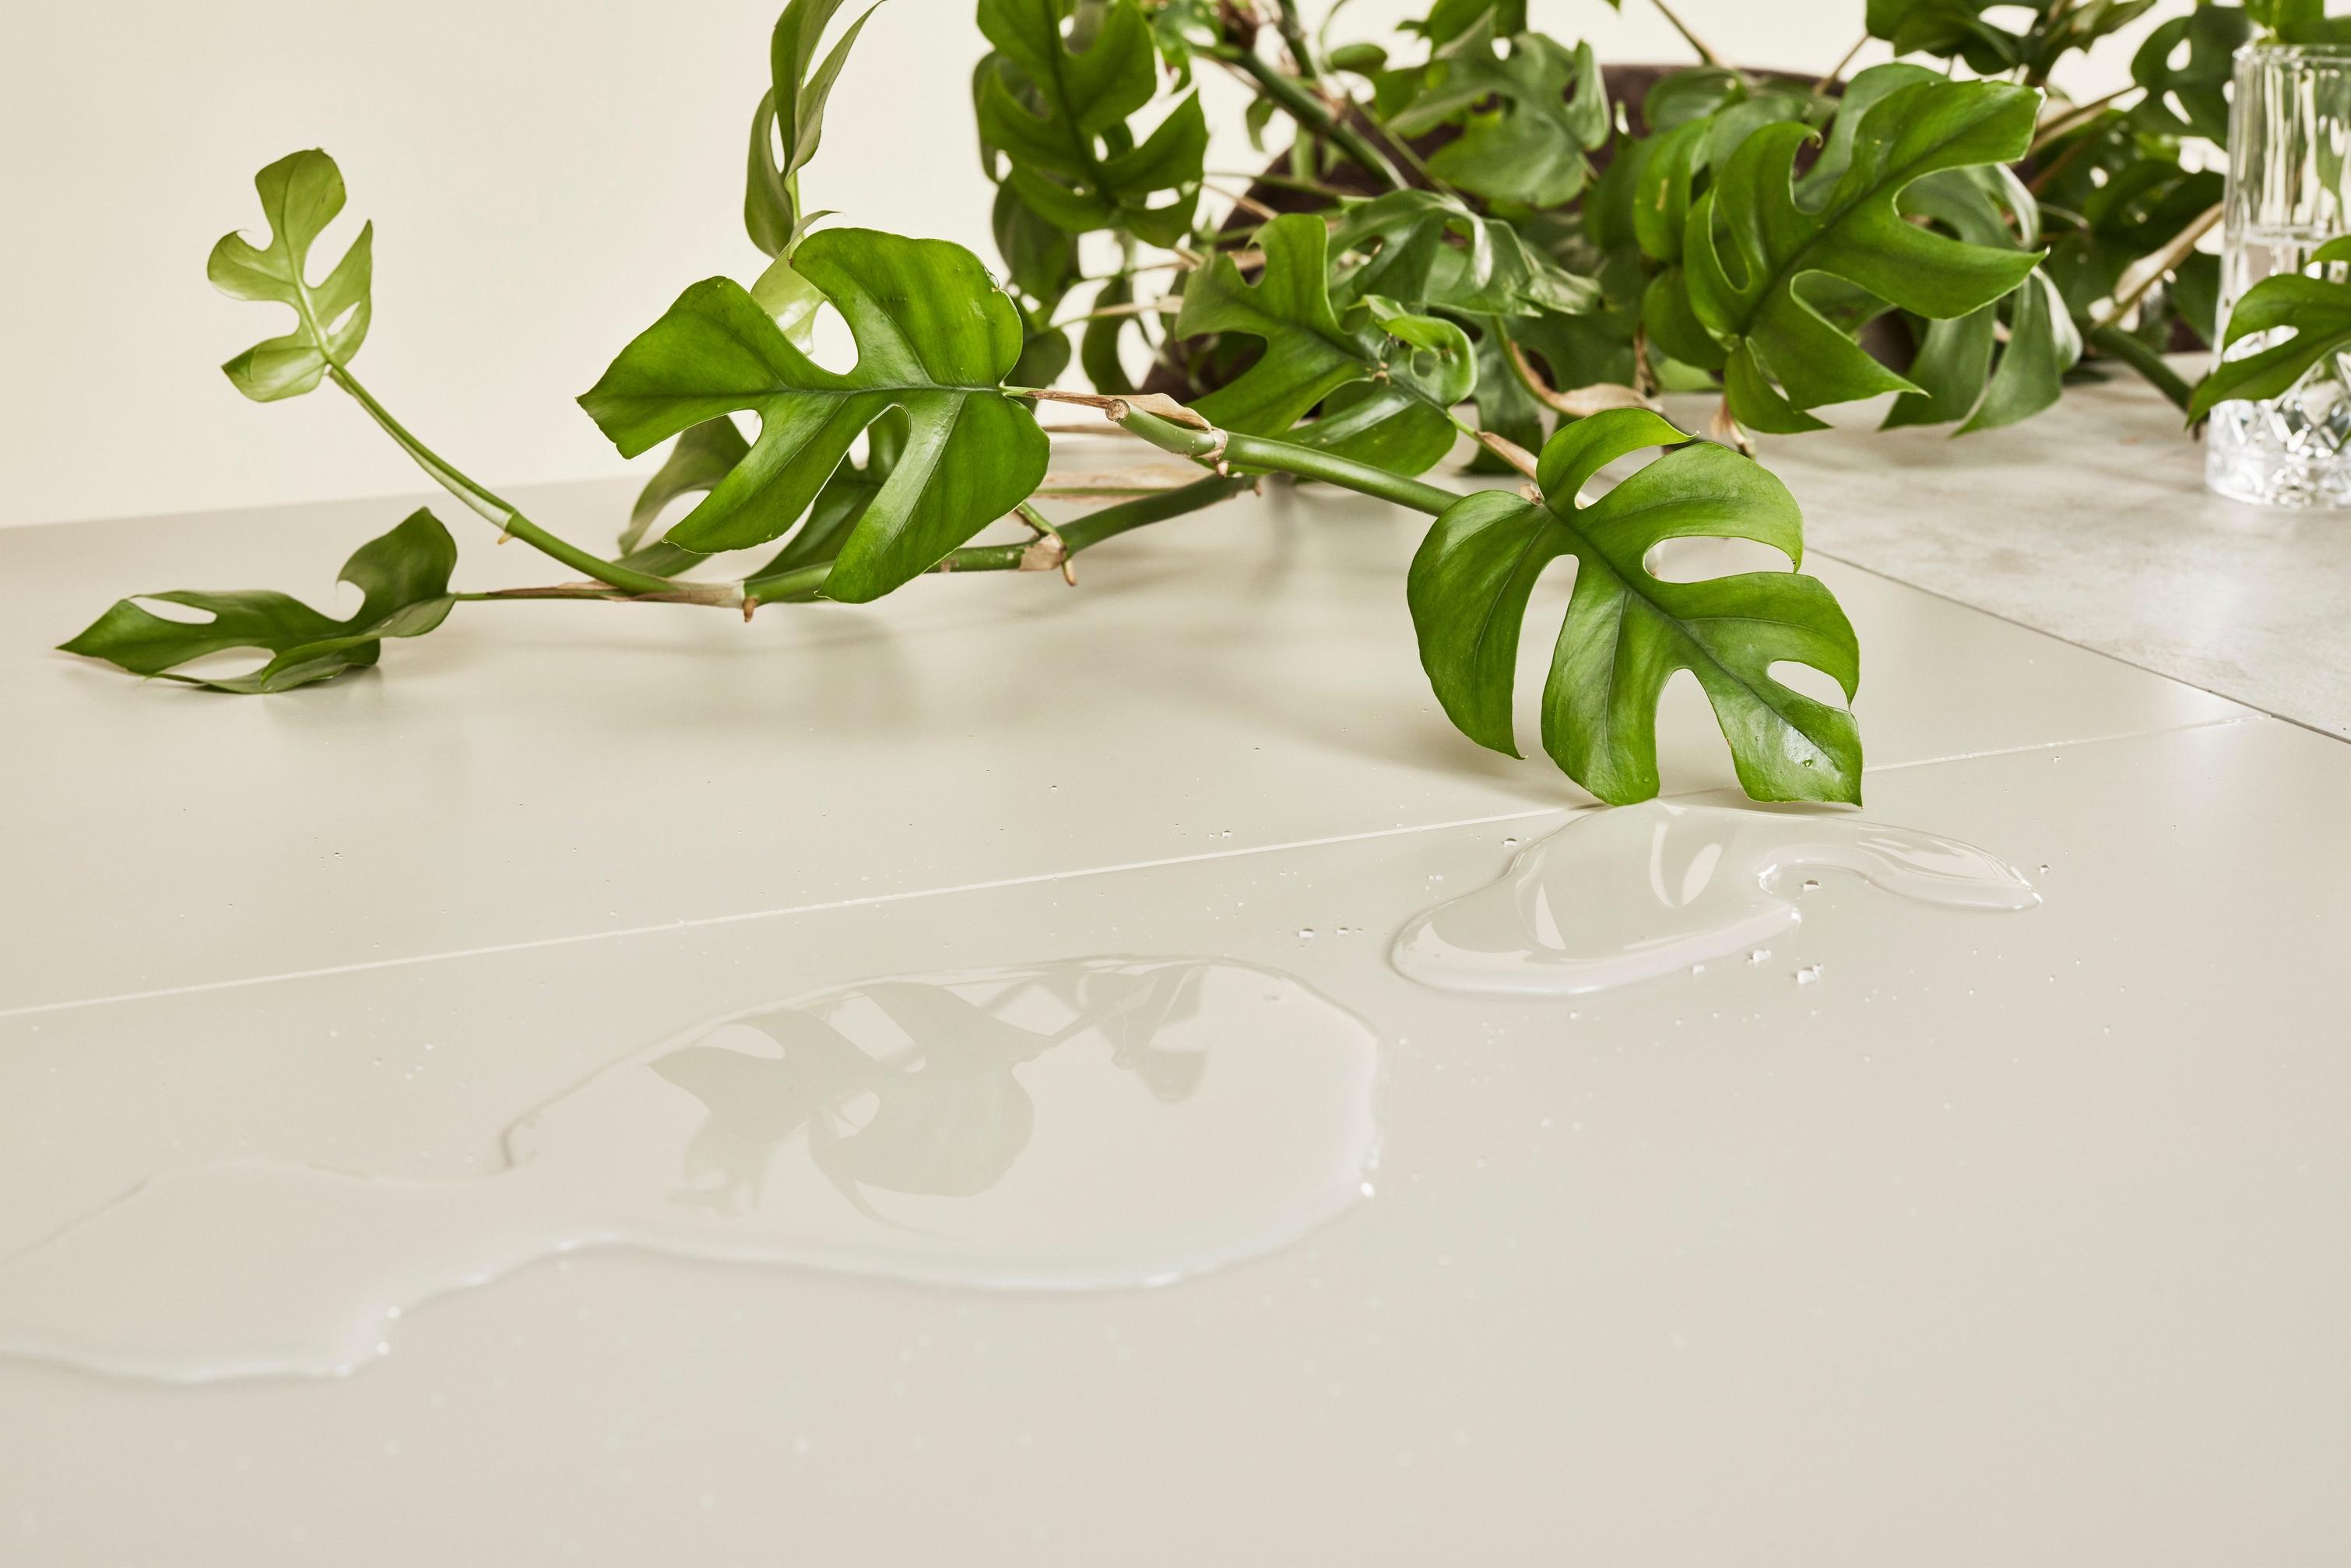 Green Monstera on lacquered surfaced table, with clear water spill reflecting leaves.